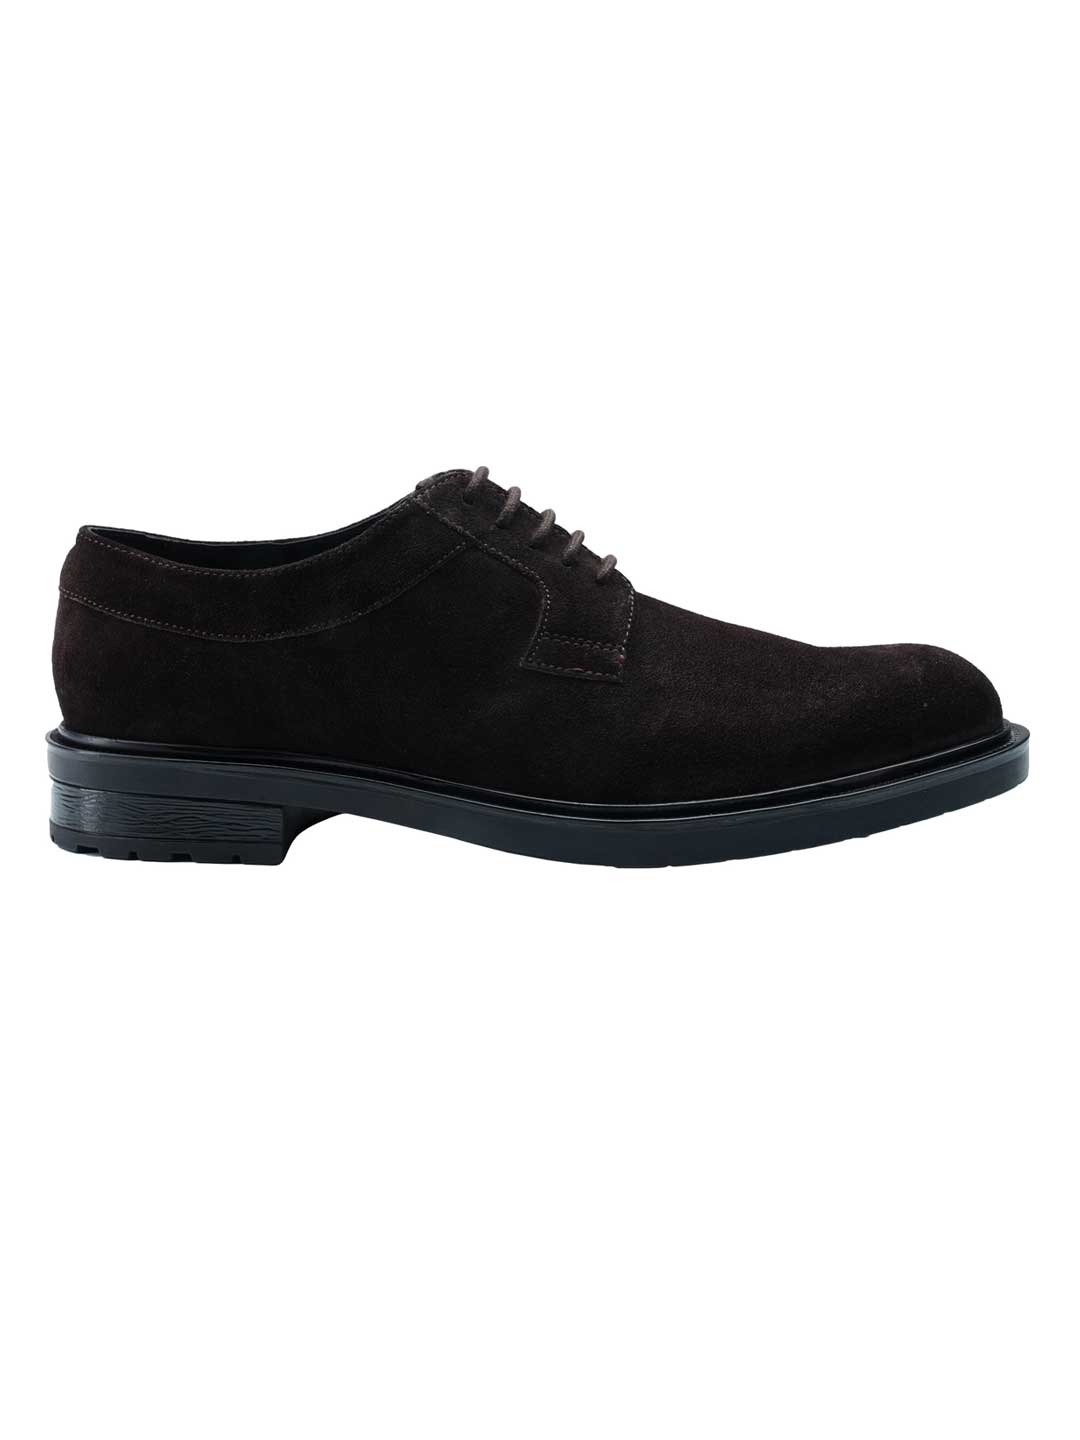 New Mr Leather Coffee Suede Derby Formal Shoes Occasions | Casual leather  shoes, Formal shoes for men, Dress shoes men